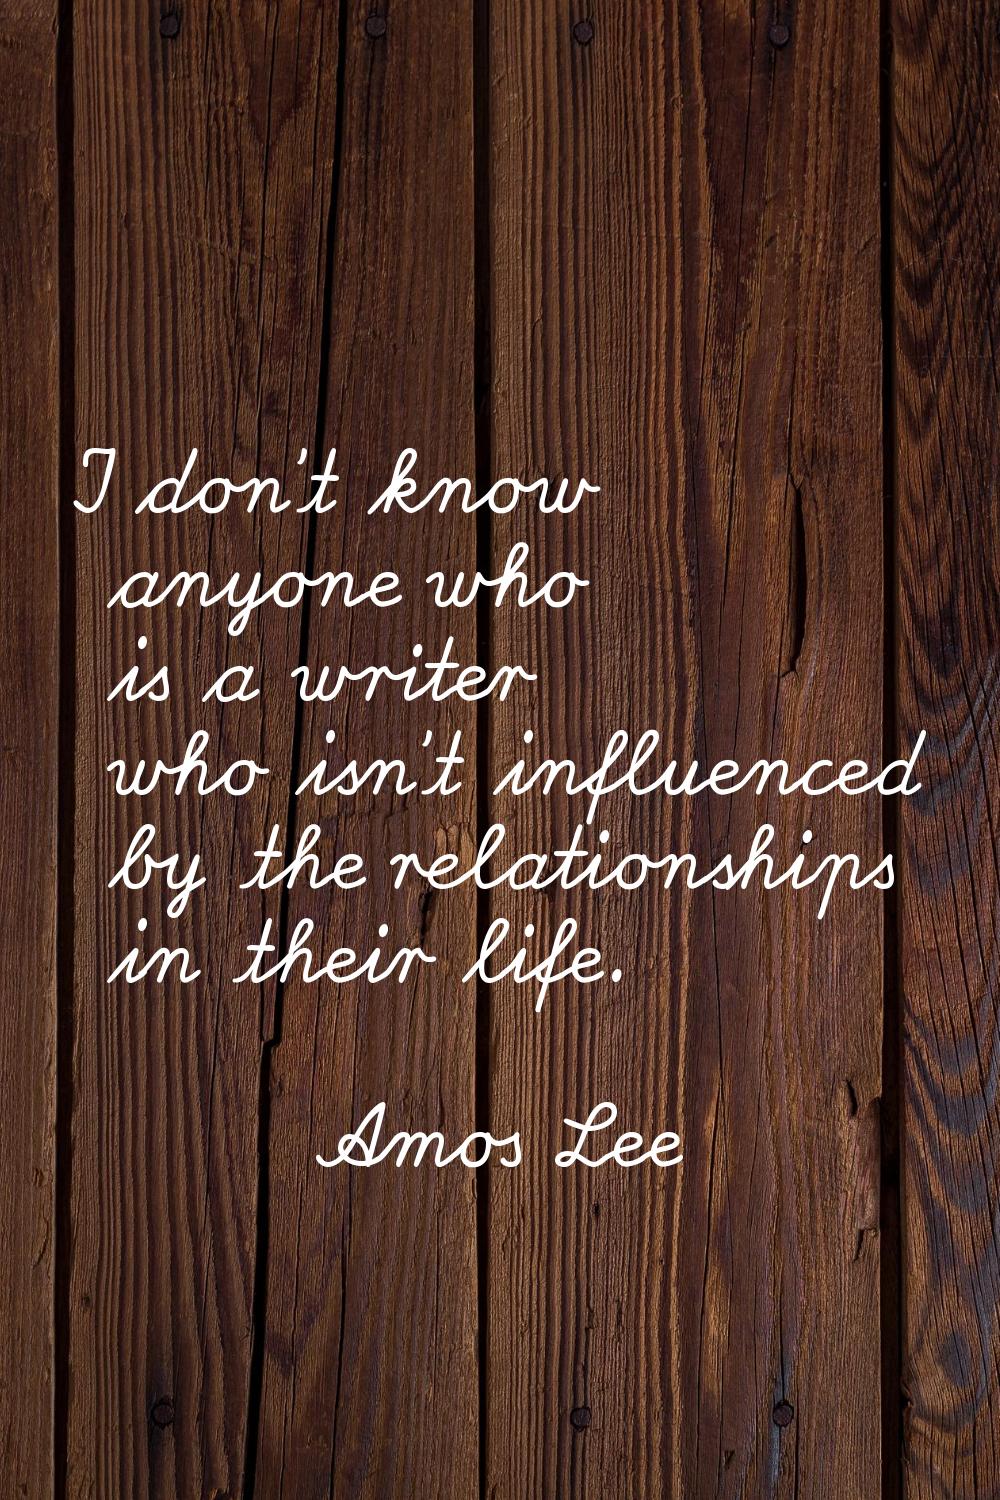 I don't know anyone who is a writer who isn't influenced by the relationships in their life.